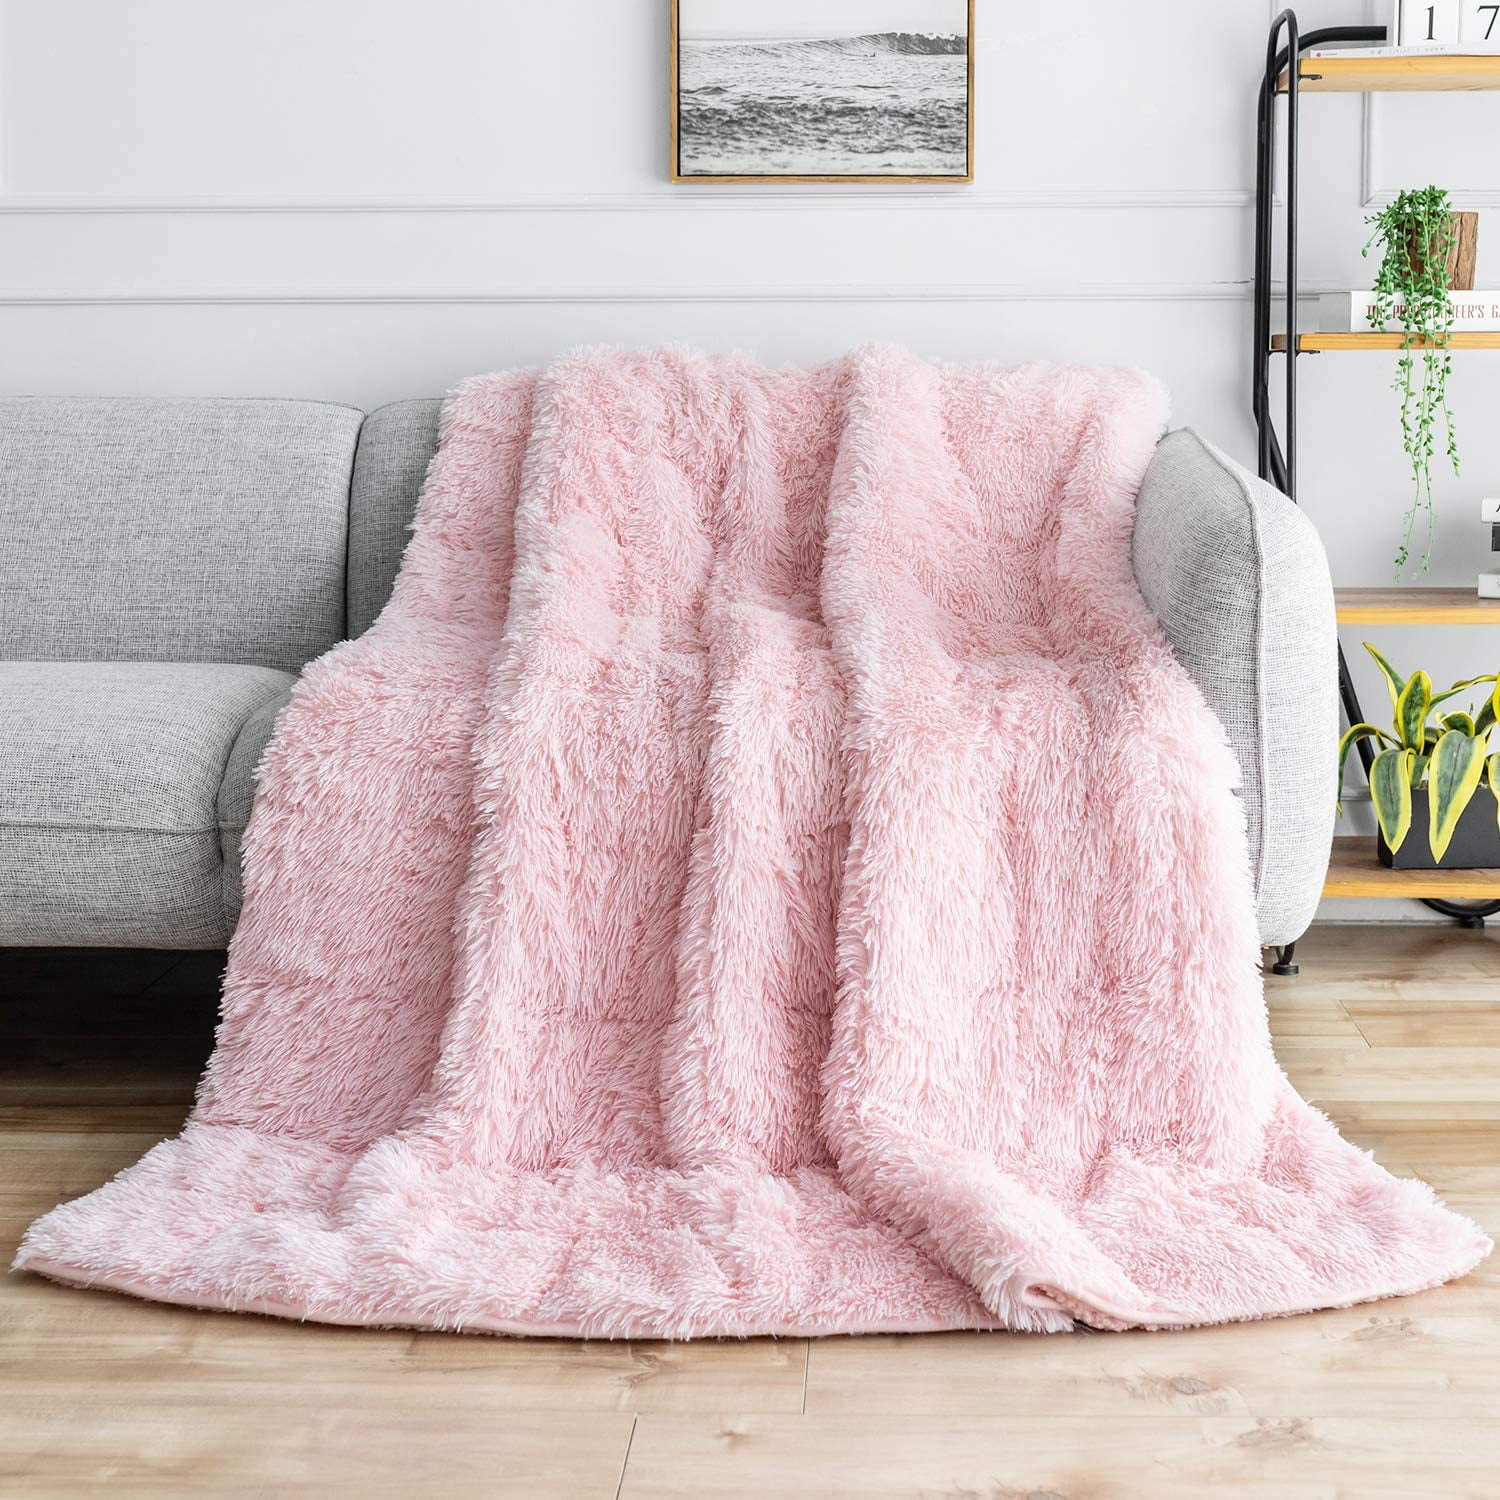 Shaggy Faux Fur Weighted Blanket 15lbs BUZIO Super Soft Plush Fleece and Cozy Sherpa Reverse Long Fur Fluffy Bed Throw Blankets 60x80 Cream